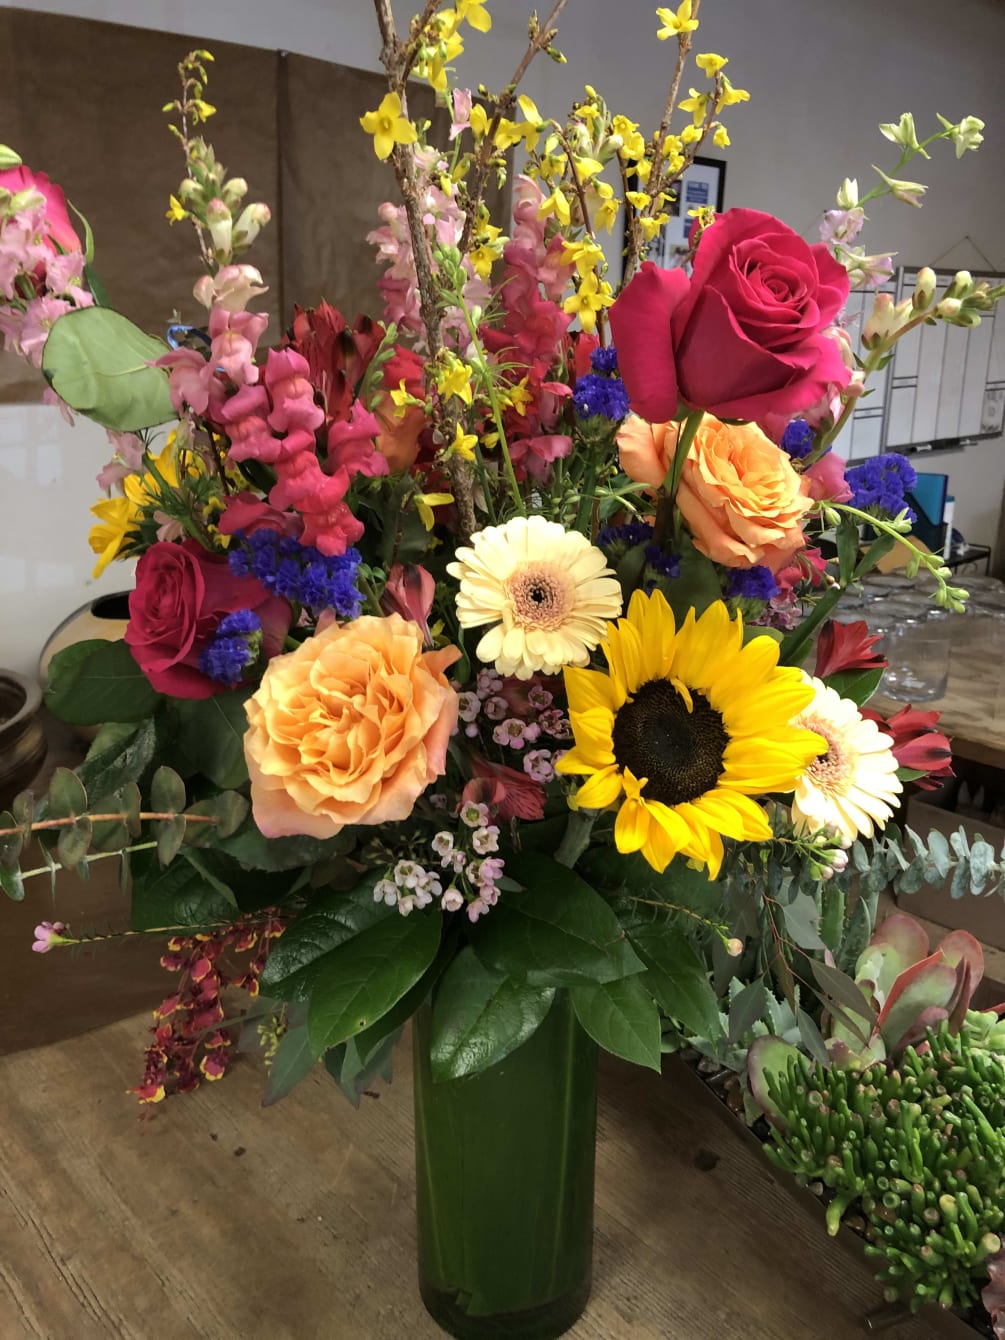 Roses, sunflowers, gerbera daisies and seasonal spring flowers are a perfect combination.